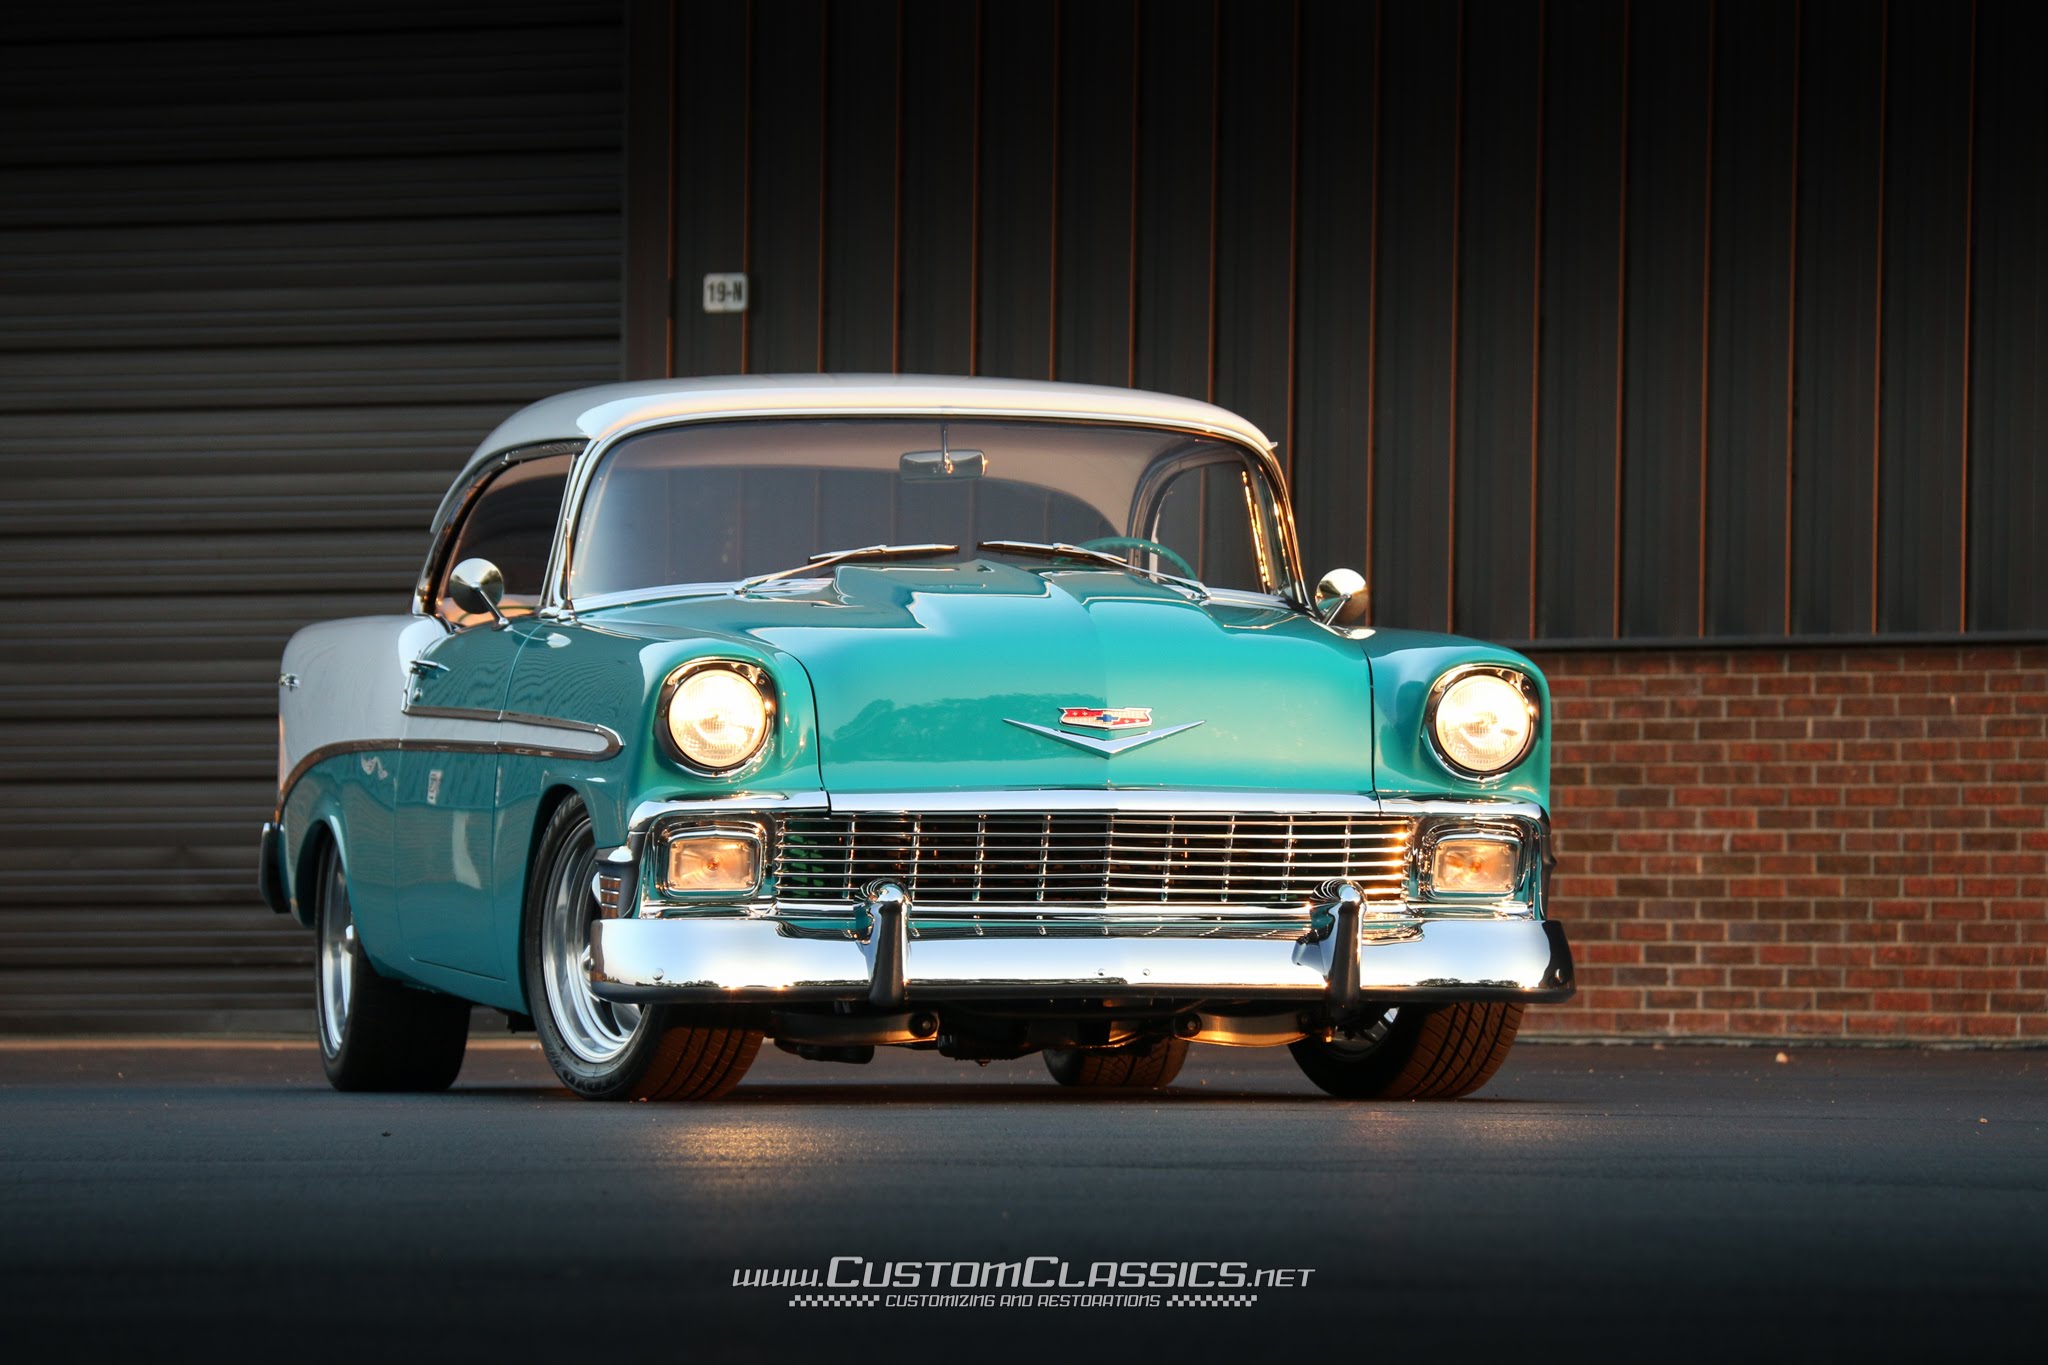 1956 Chevrolet Bel Air Pics, Vehicles Collection